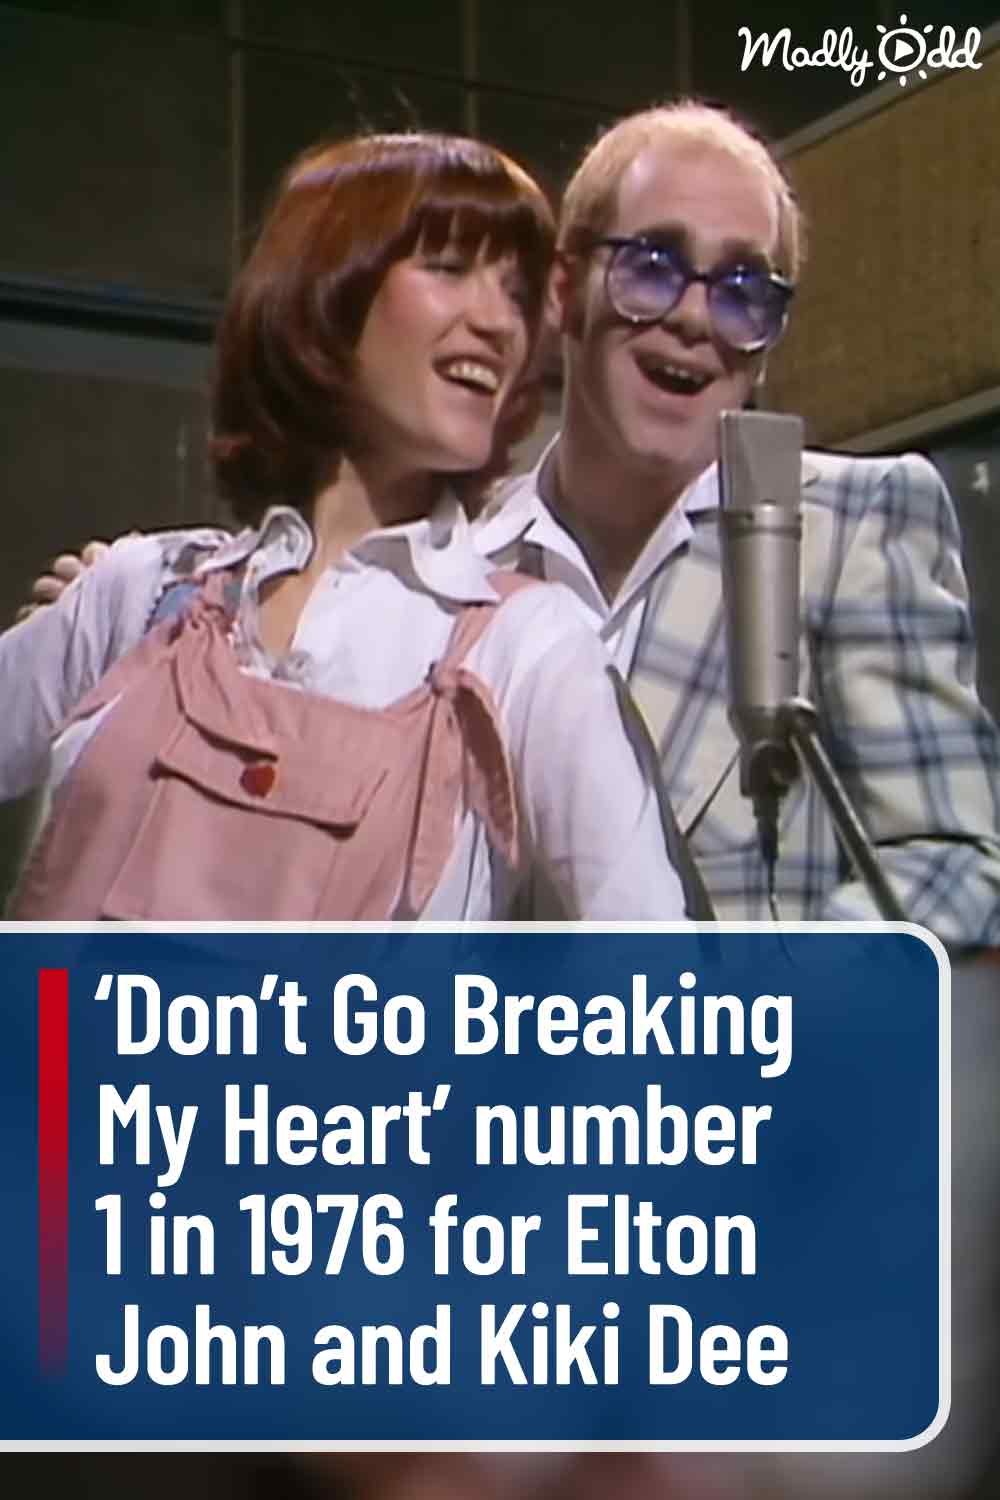 ‘Don’t Go Breaking My Heart’ number 1 in 1976 for Elton John and Kiki Dee